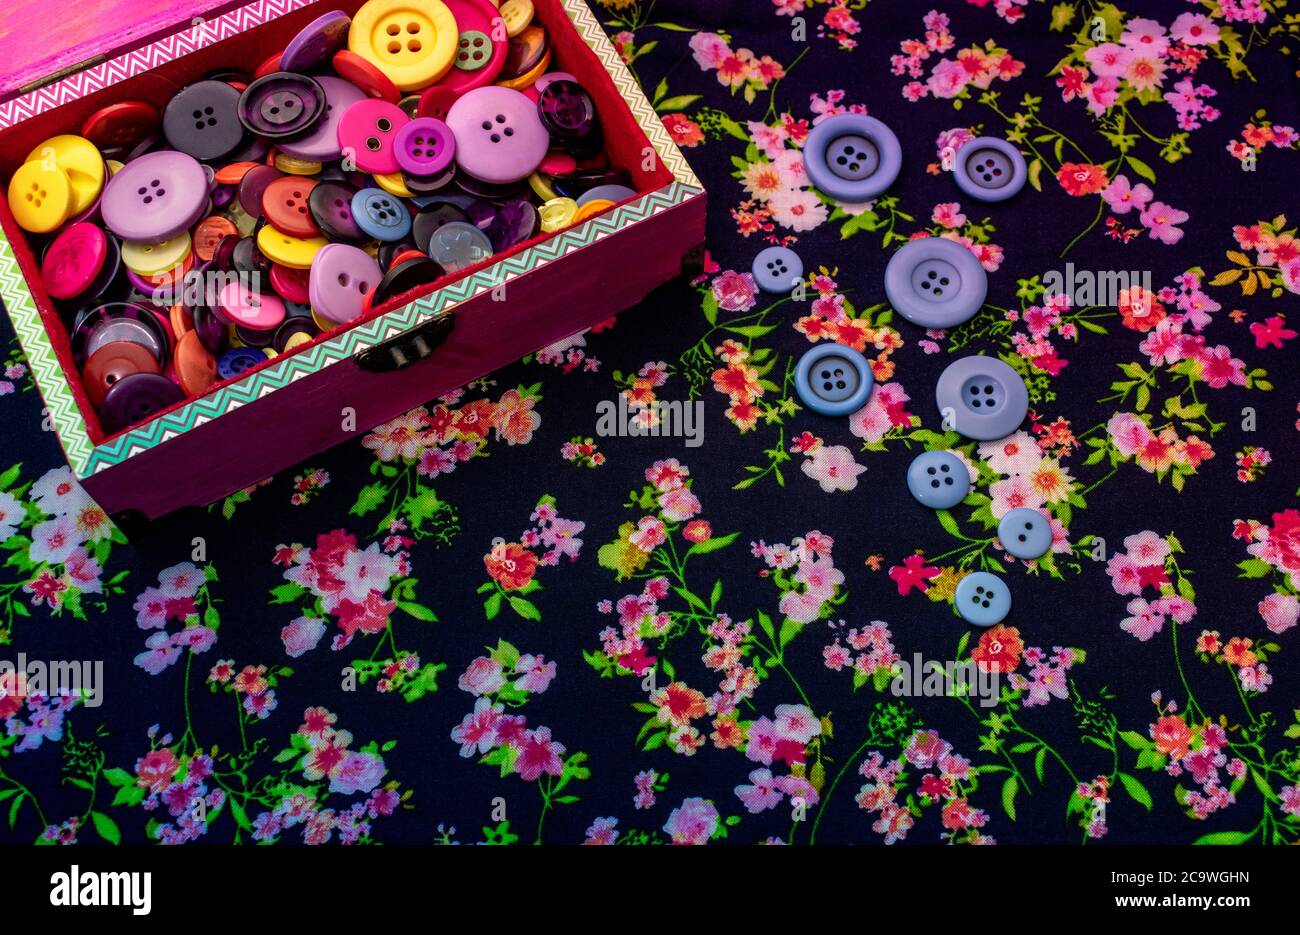 Colorful sewing button box over flowered fabric background with copy space Stock Photo